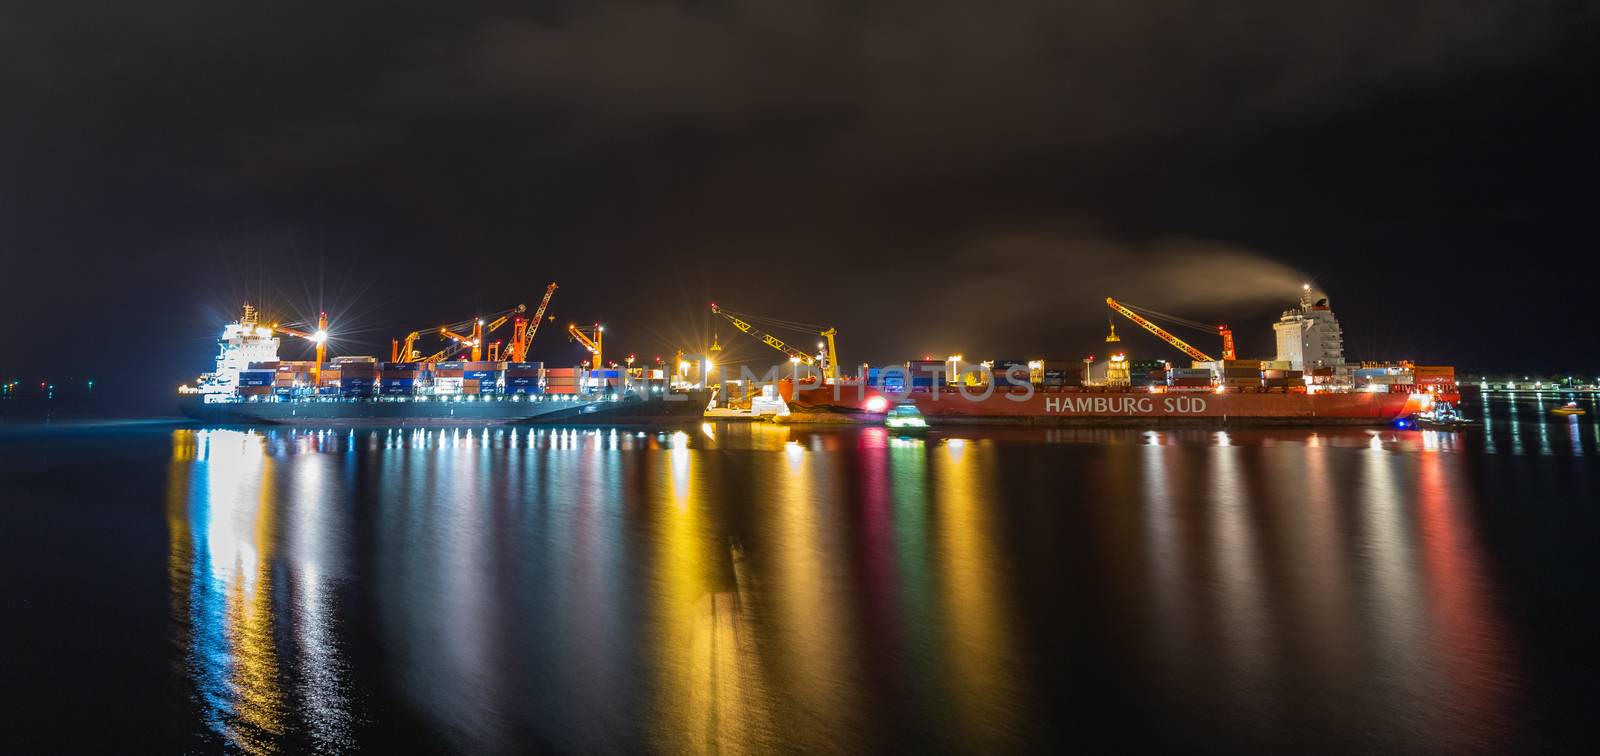 Papeete, French Polynesia - October 2, 2018: Night shot. Papeete port with loading cranes and cargo ships being loaded with containers. Beautiful lights. Long exposure.